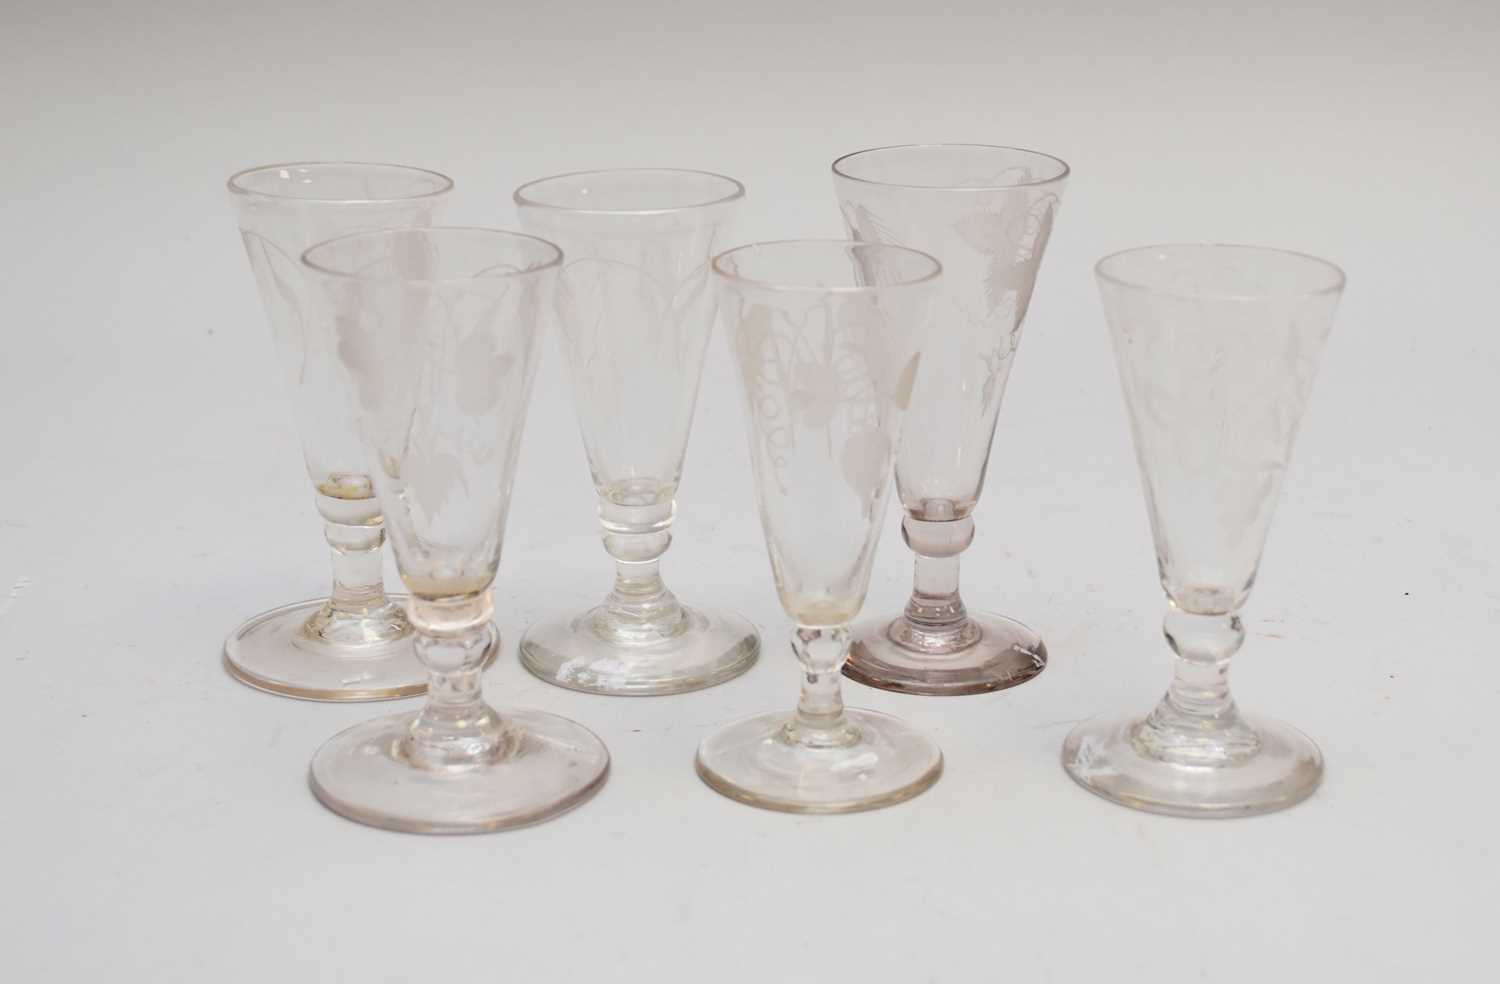 Six short ale glasses, late 18th/early 19th century